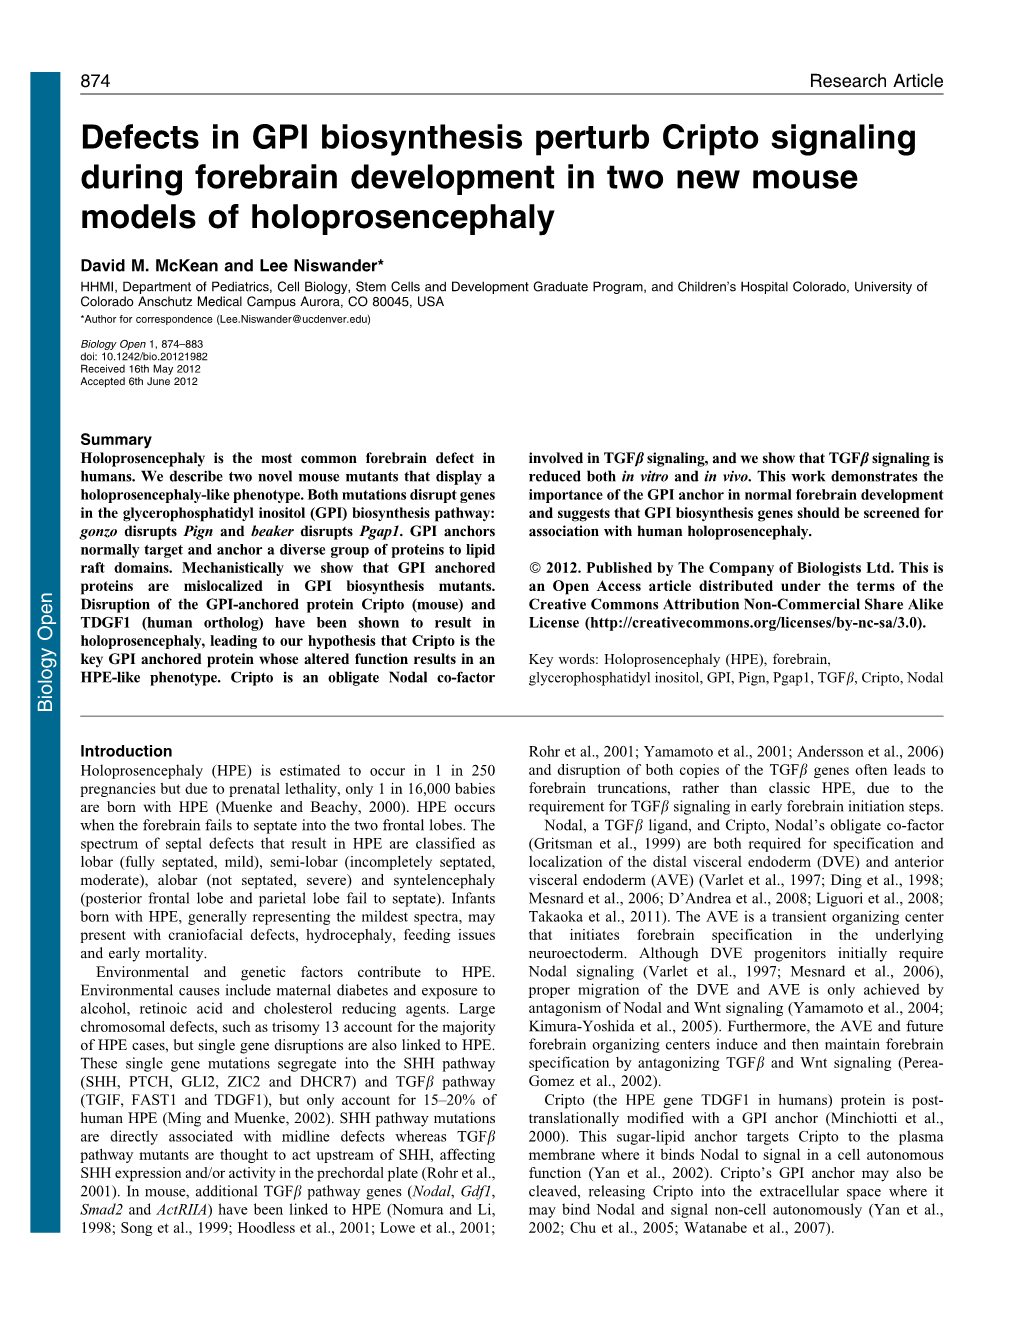 Defects in GPI Biosynthesis Perturb Cripto Signaling During Forebrain Development in Two New Mouse Models of Holoprosencephaly